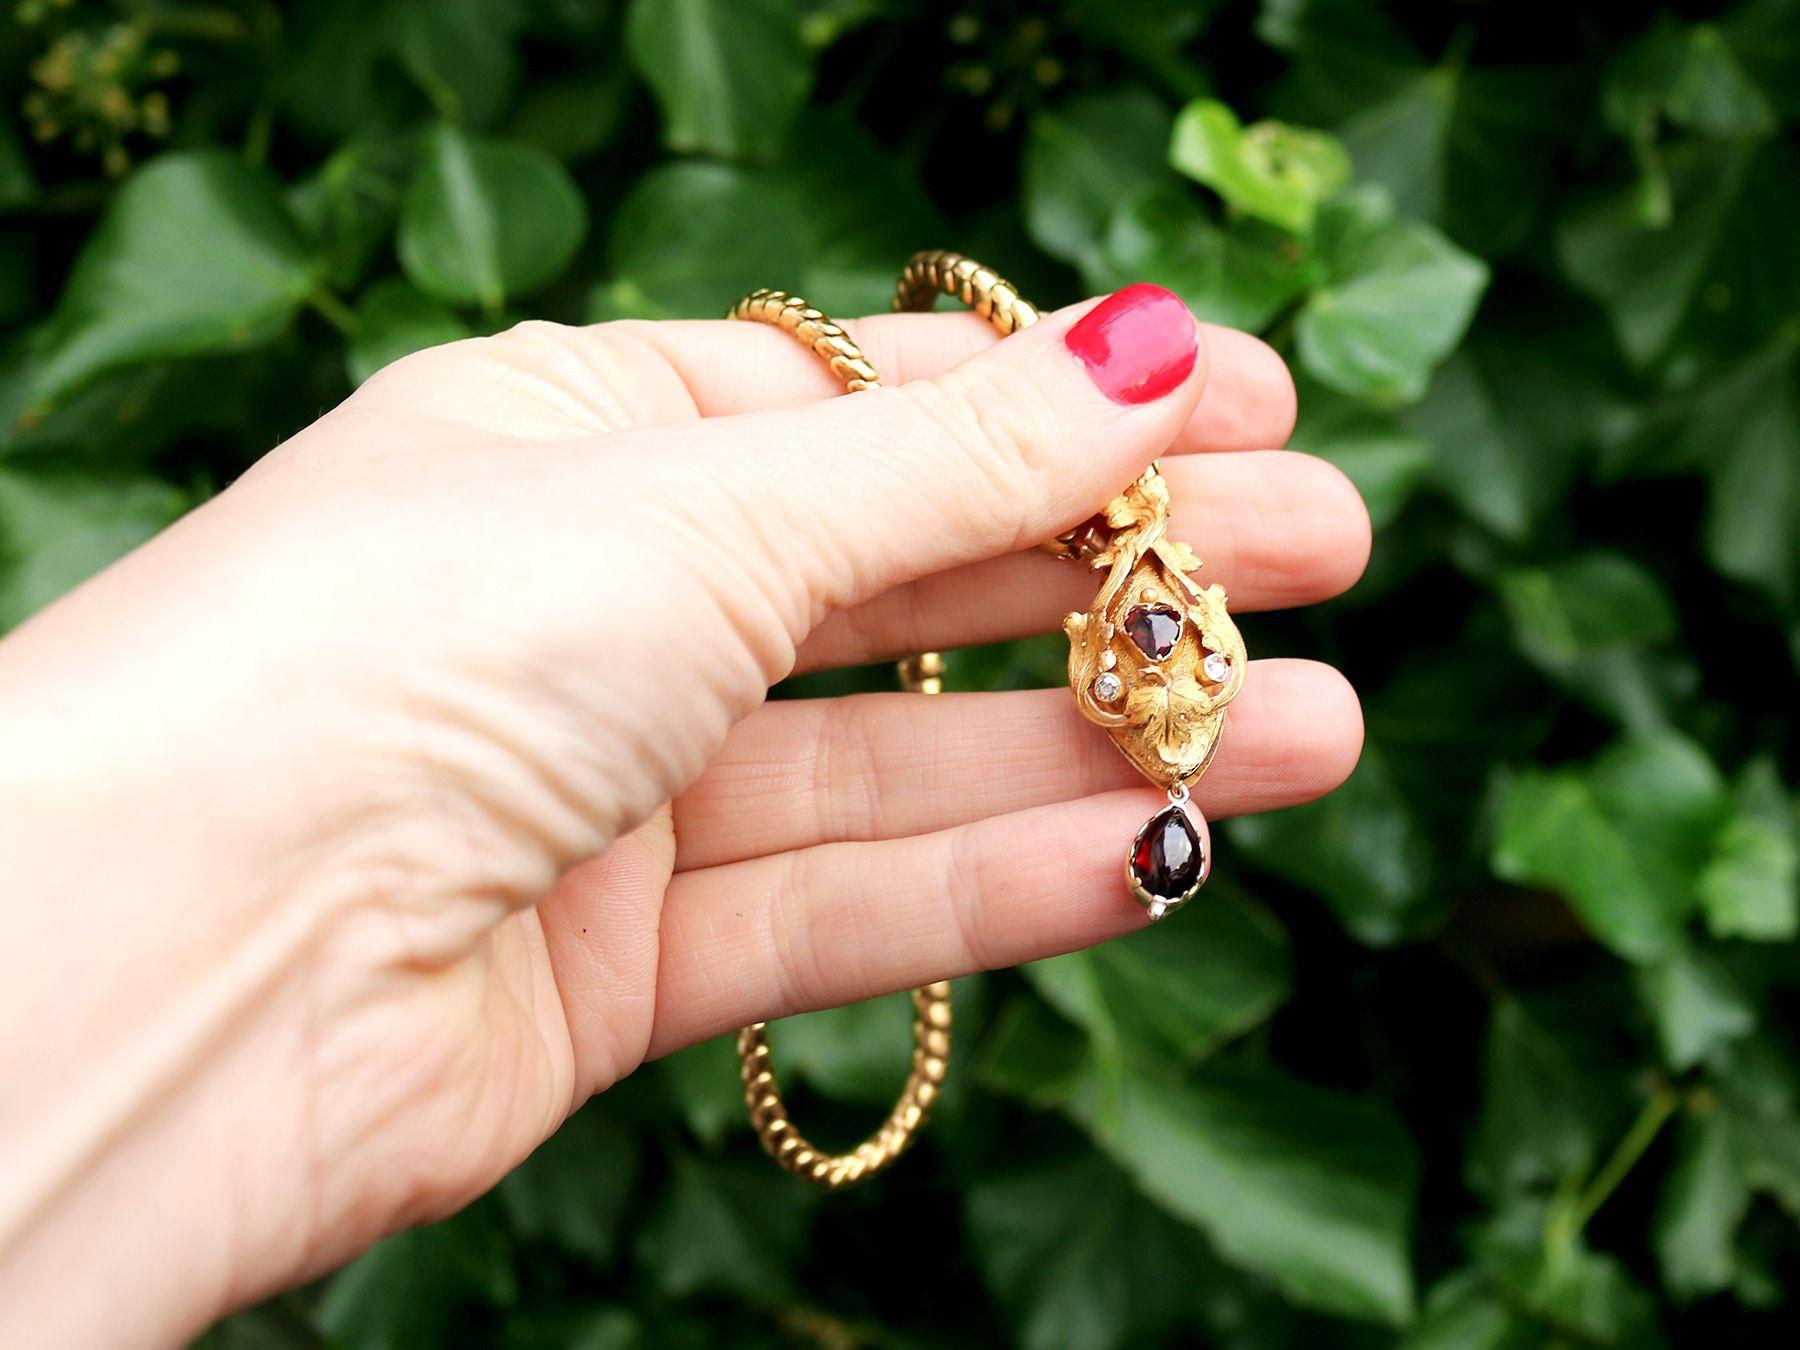 A stunning, fine and impressive antique Victorian 3.06 carat garnet and 0.13 carat diamond, 21 karat yellow gold necklace in the form of a snake; part of our diverse antique jewelry and estate jewelry collections.

This stunning, fine and impressive